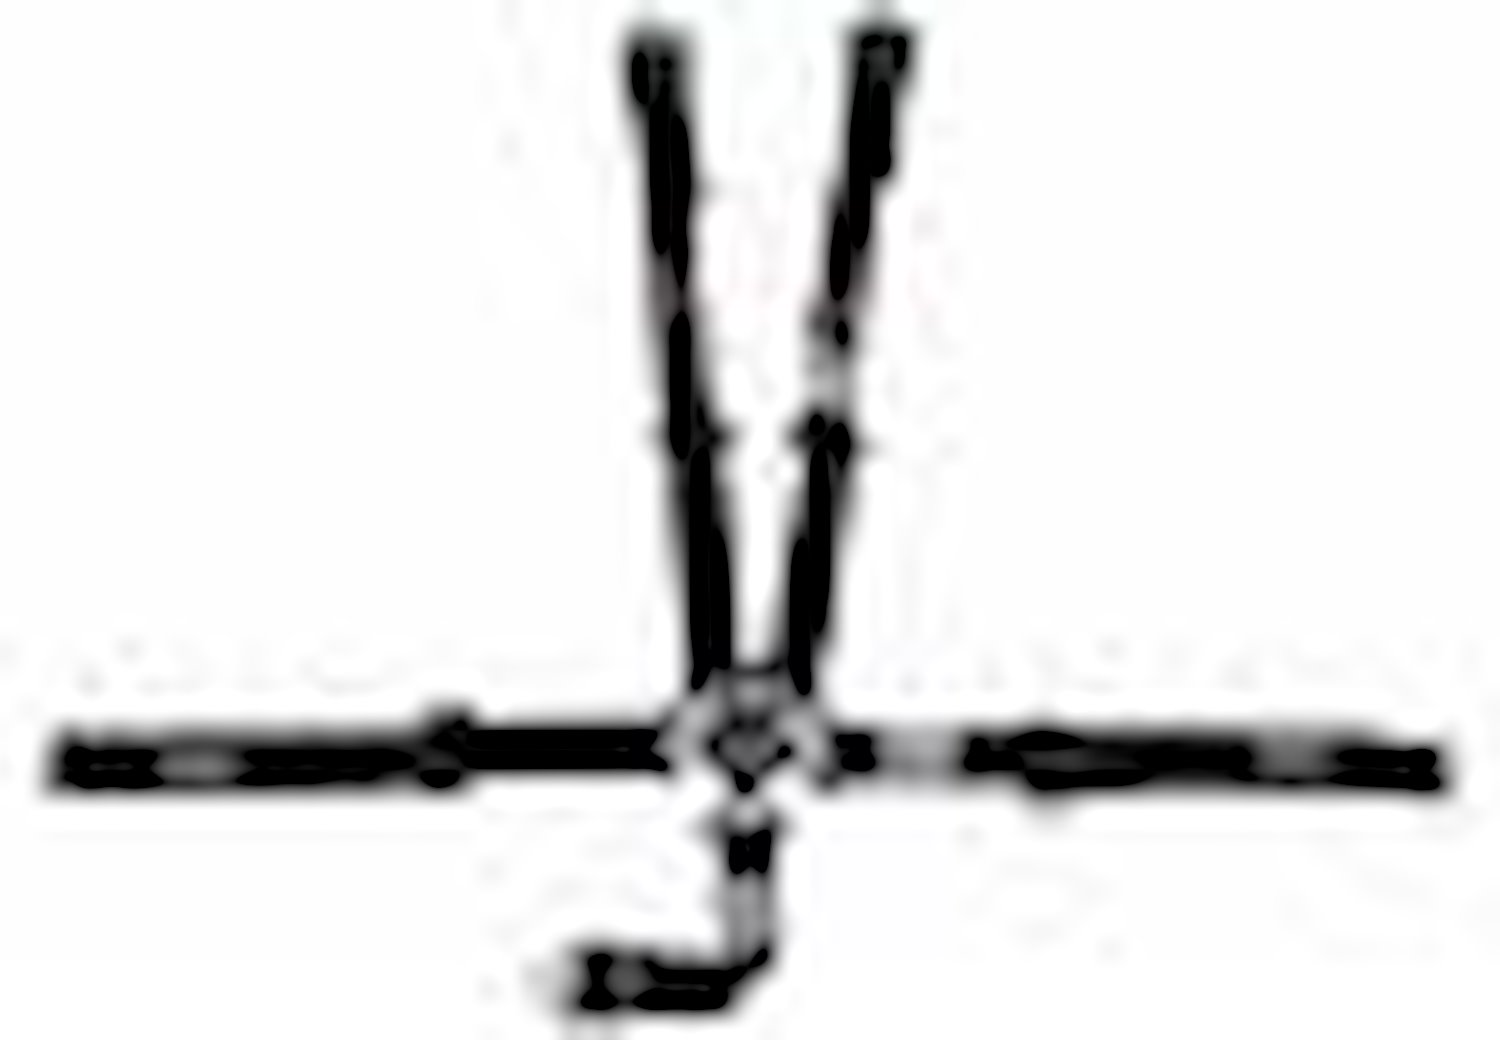 SFI 16.1 CAM-LOCK HARNESS 2 PULL UP Lap Belt 2 Shoulder Harness Individual ROLL BAR Mount 2 DOUBLE S